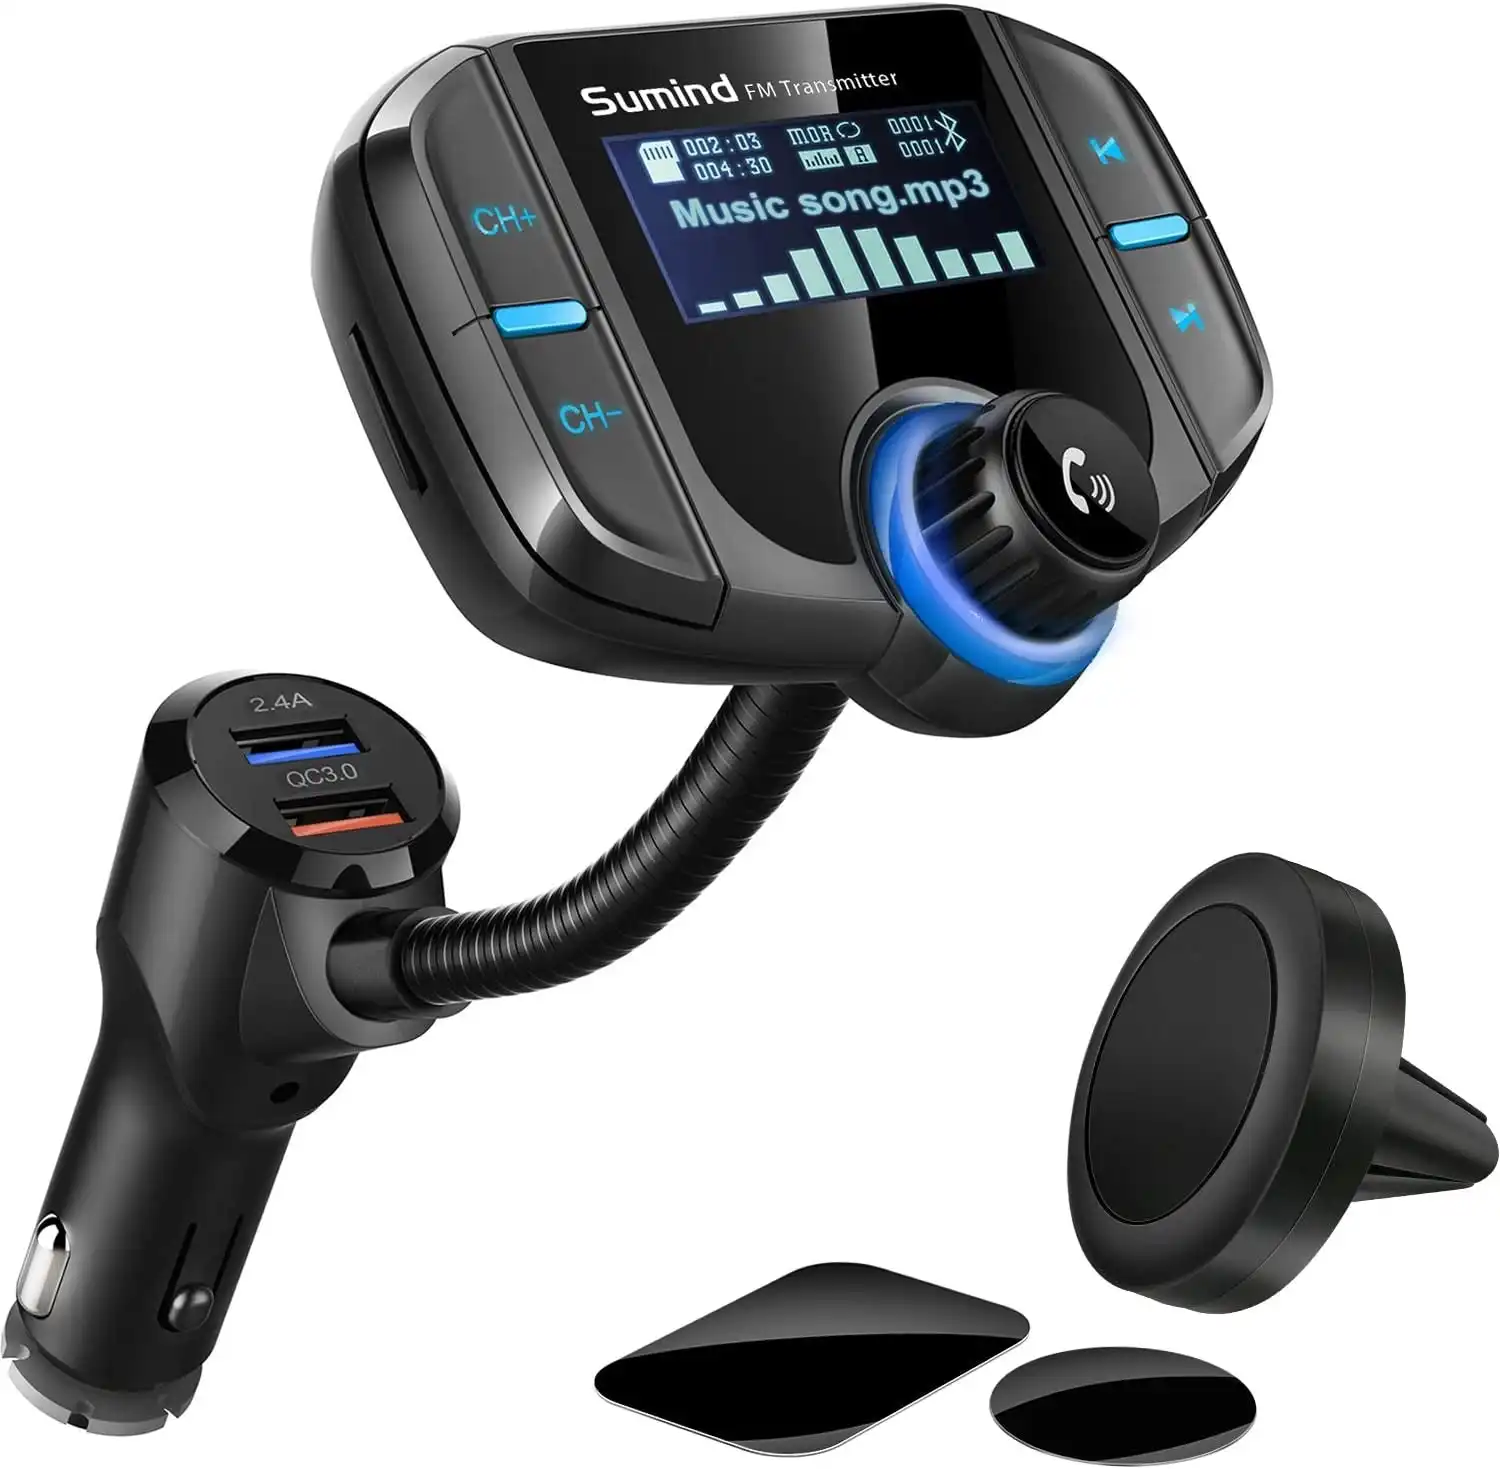 Car Adapter In-Car FM Transmitter, Wireless Radio Adapter 1.7 Inch Display, QC3.0/2.4A Dual USB Ports, AUX Output,Mp3 Player with Magnetic Mount and Plate